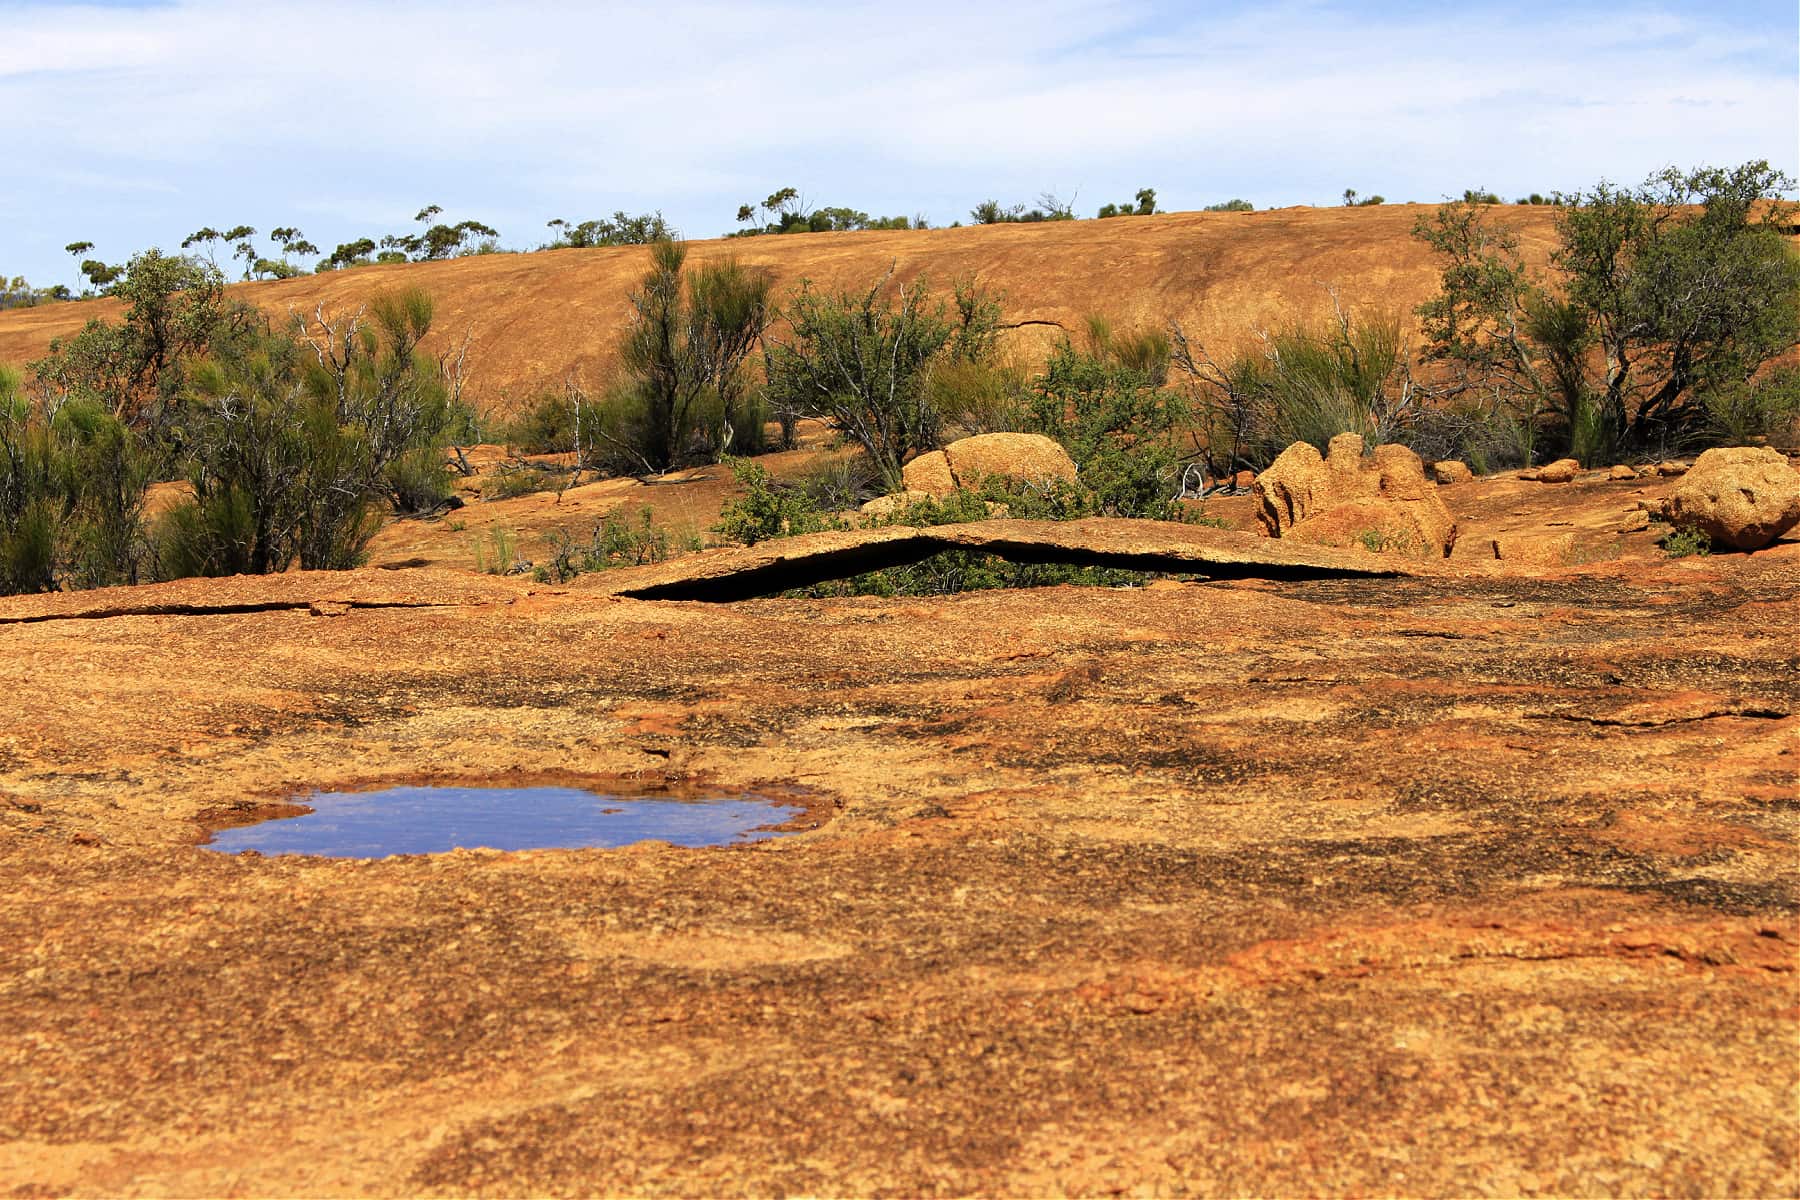 Large expanse of rock with vegetation and small pools of water